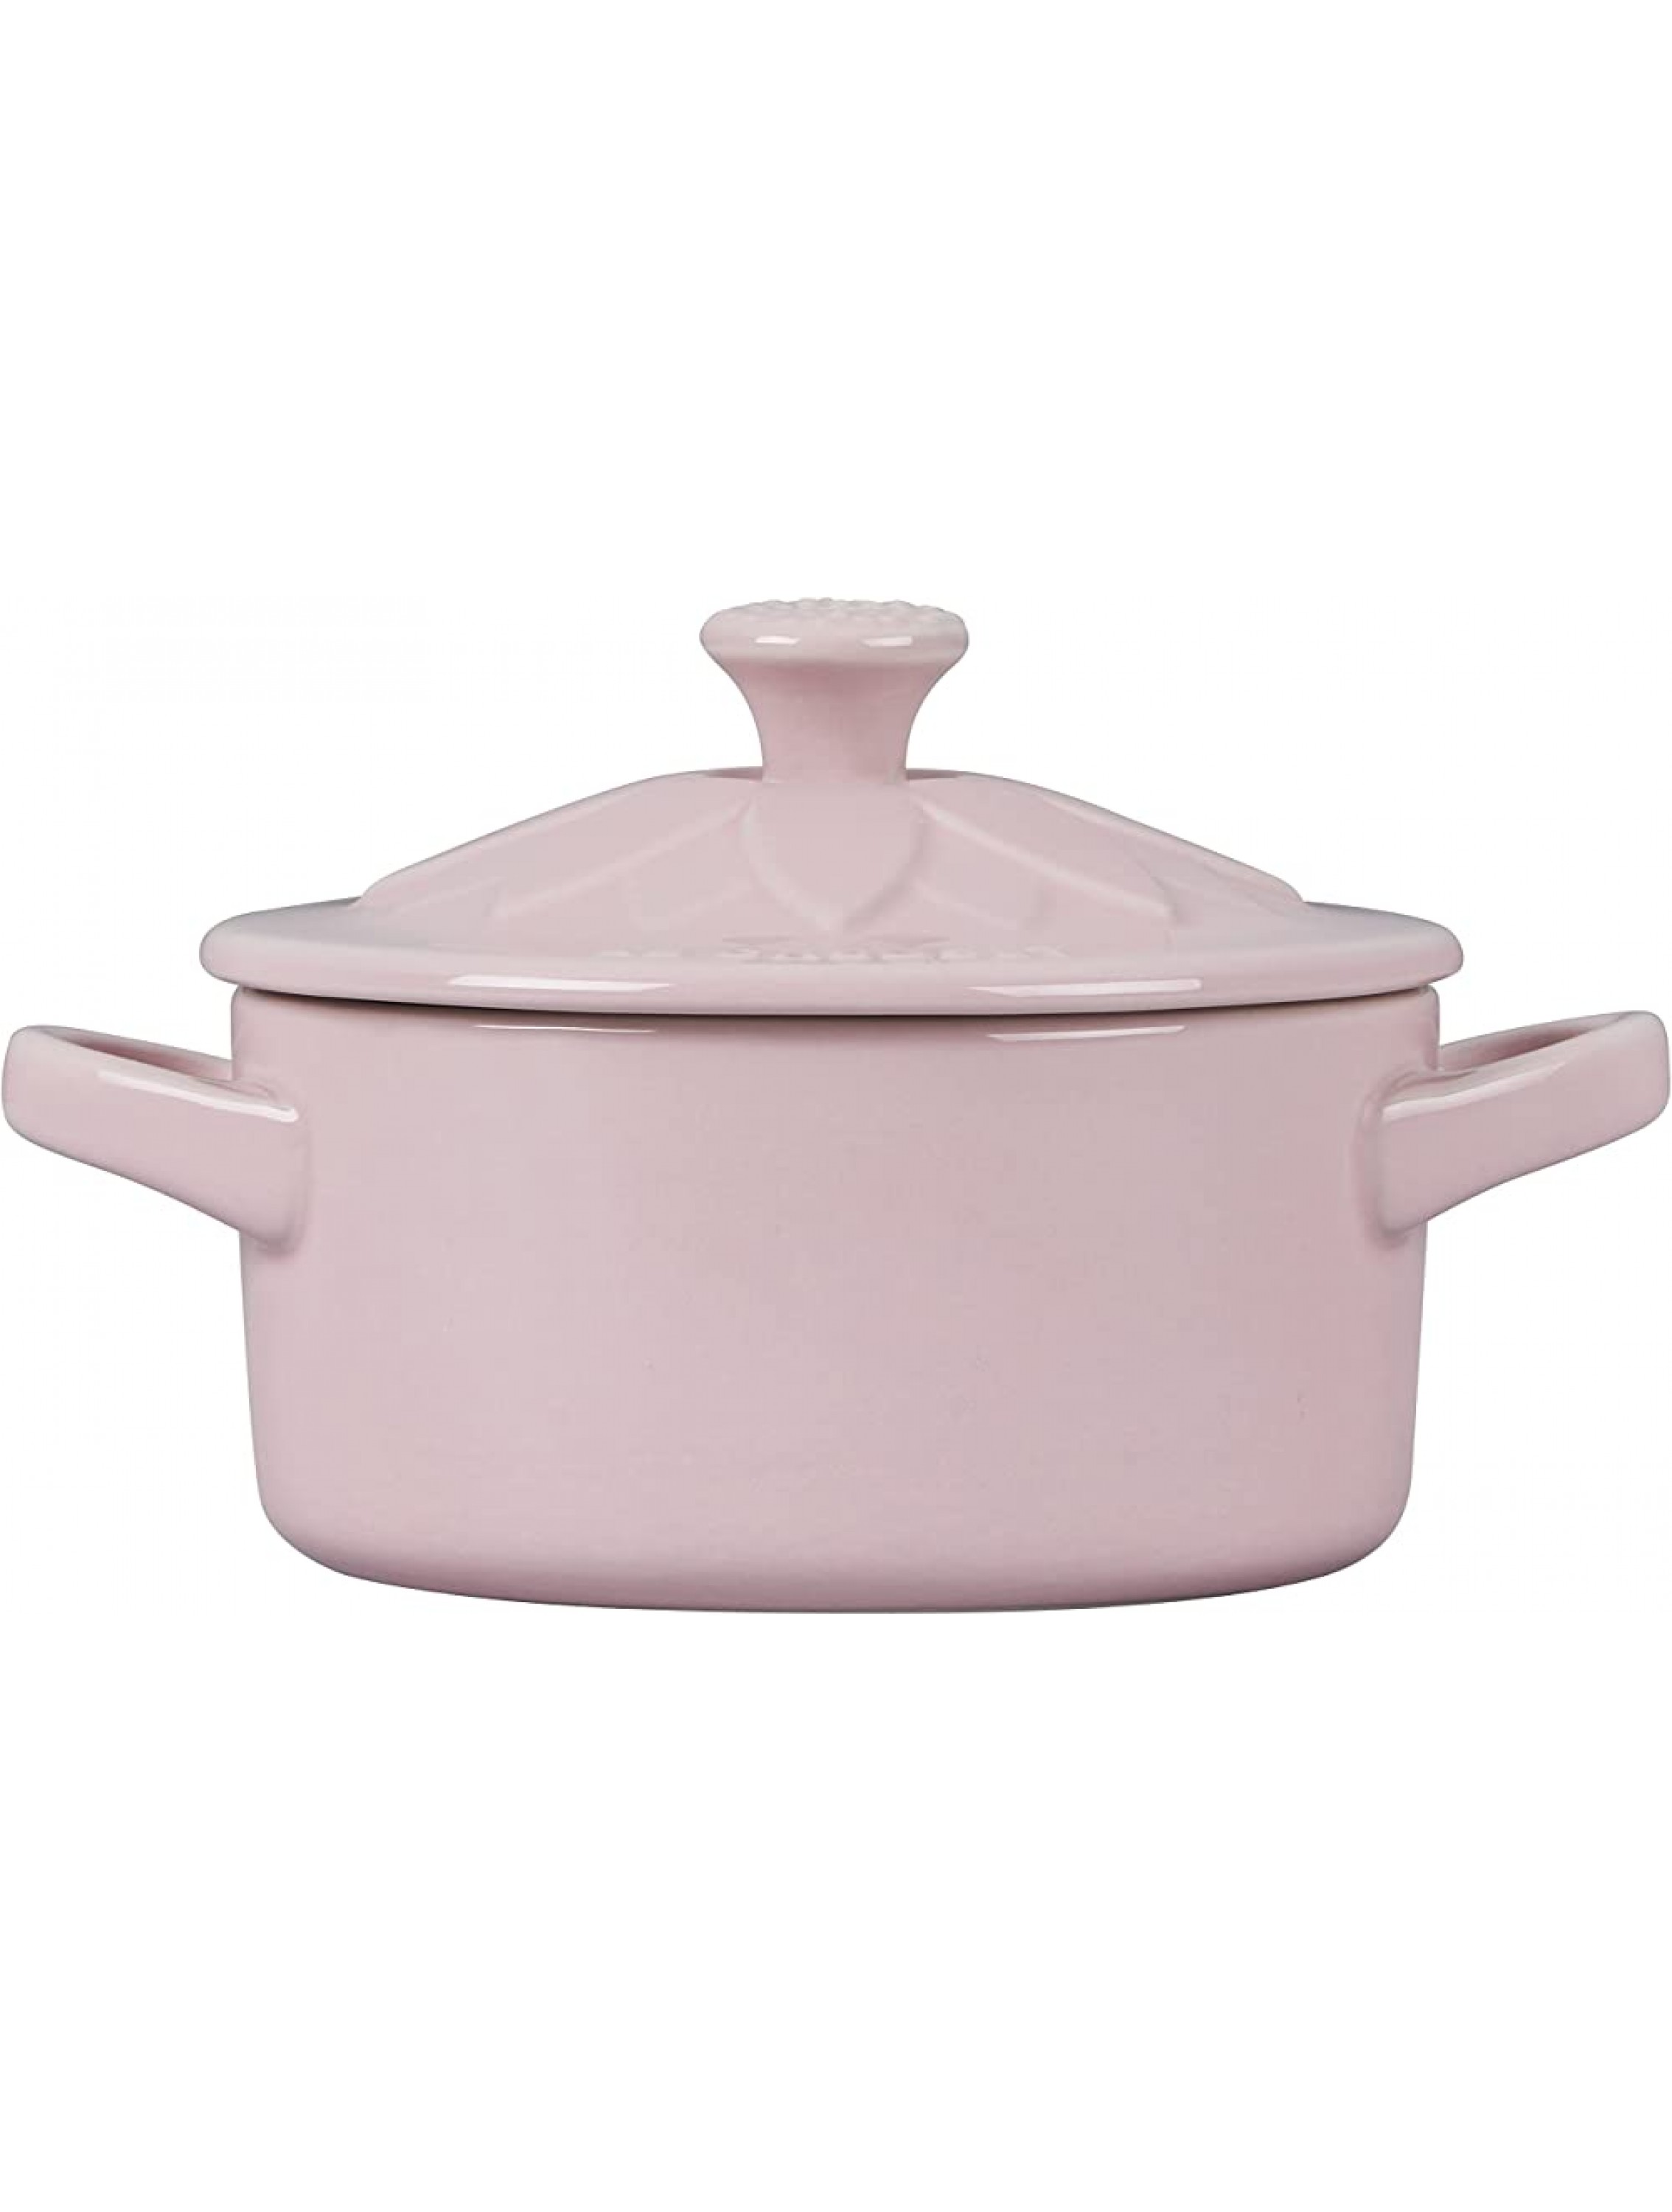 Le Creuset Stoneware Mini Round Cocotte with Flower Lid 8oz Chiffon Pink - BZBWZL03T